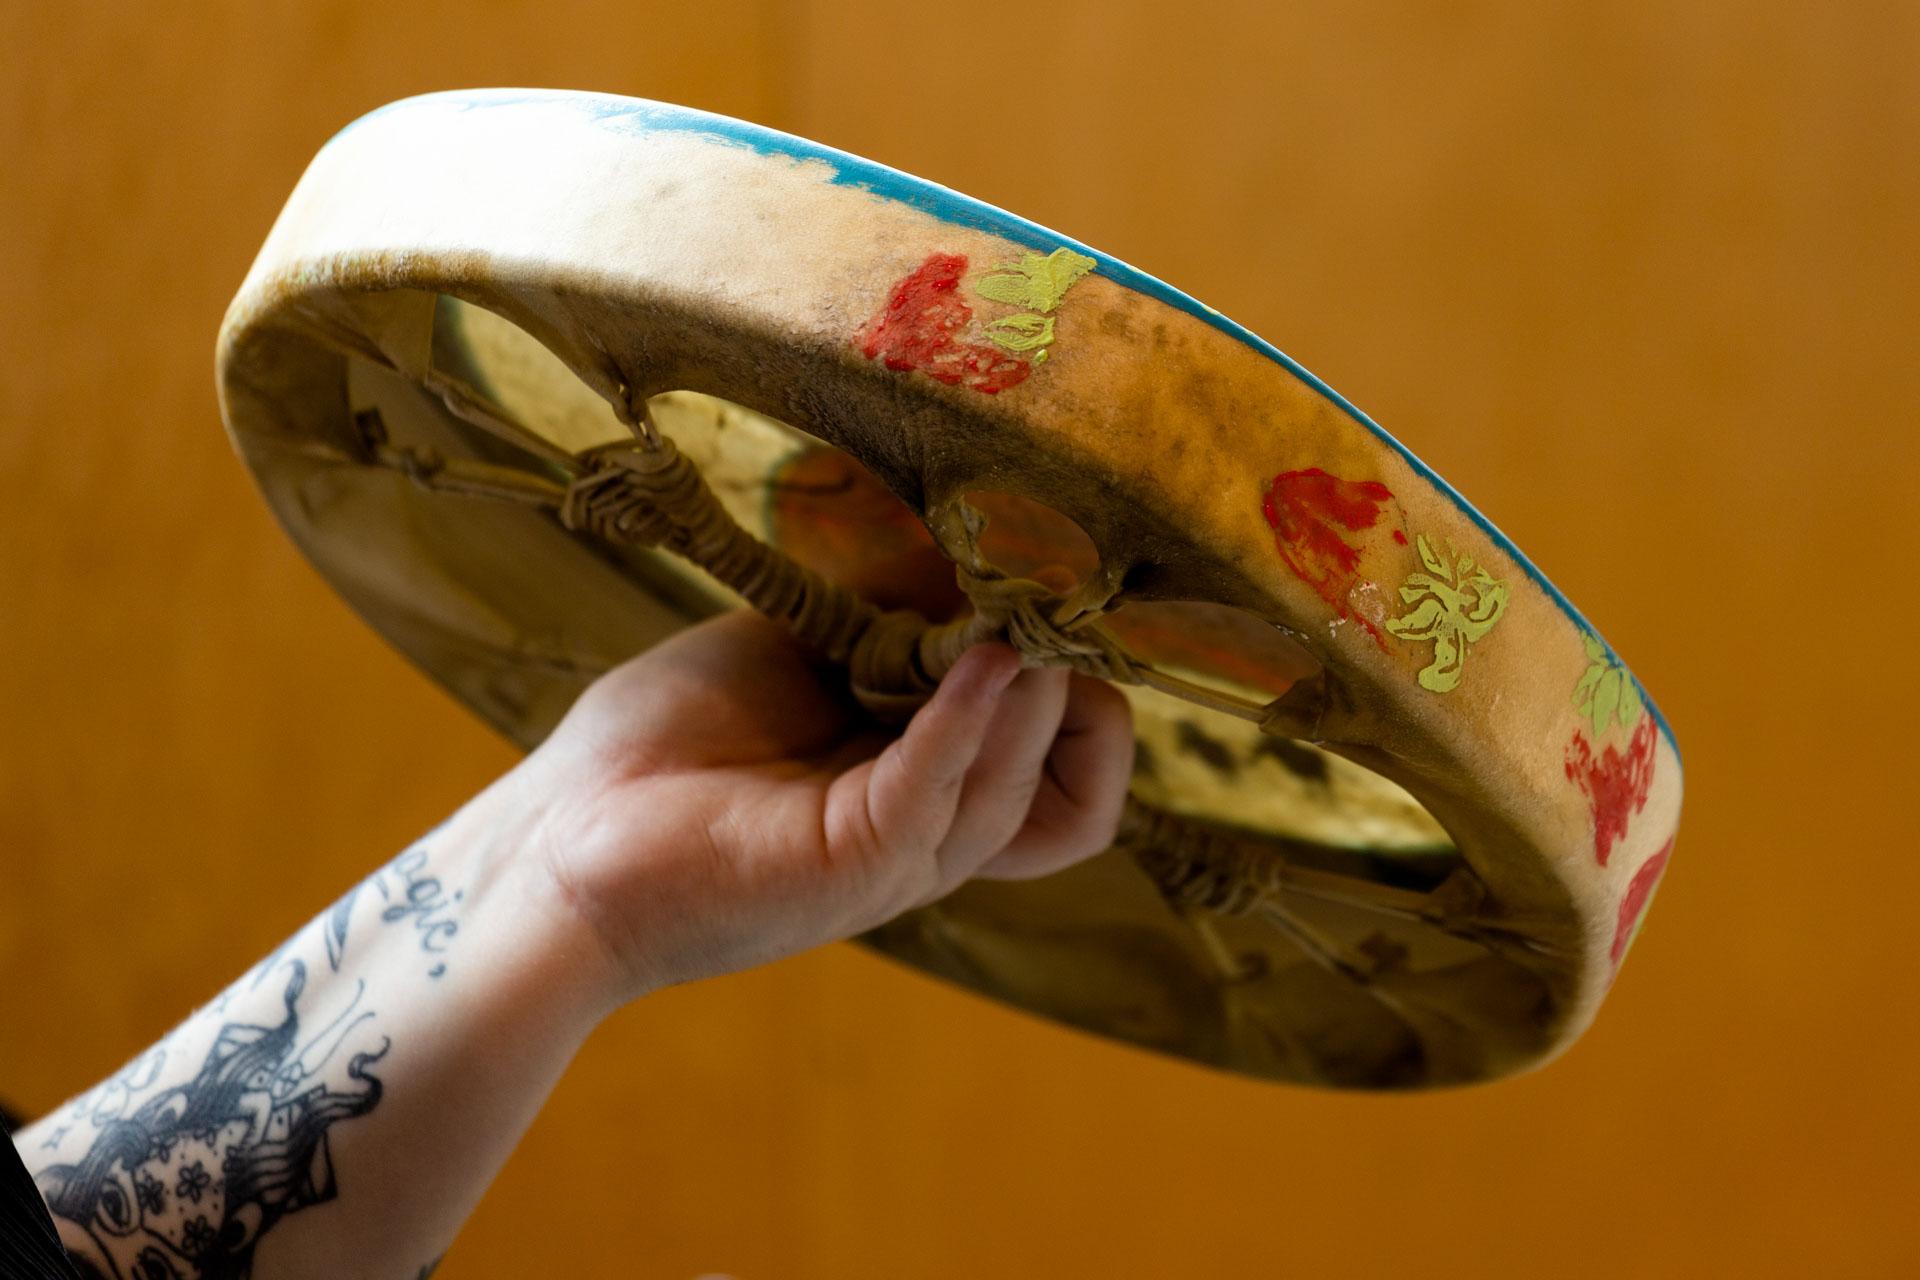 A tattooed arm holds out a rawhide drum, stamped with a strawberry design on its outer edge. The rawhide lacing on the back of the drum is visible.